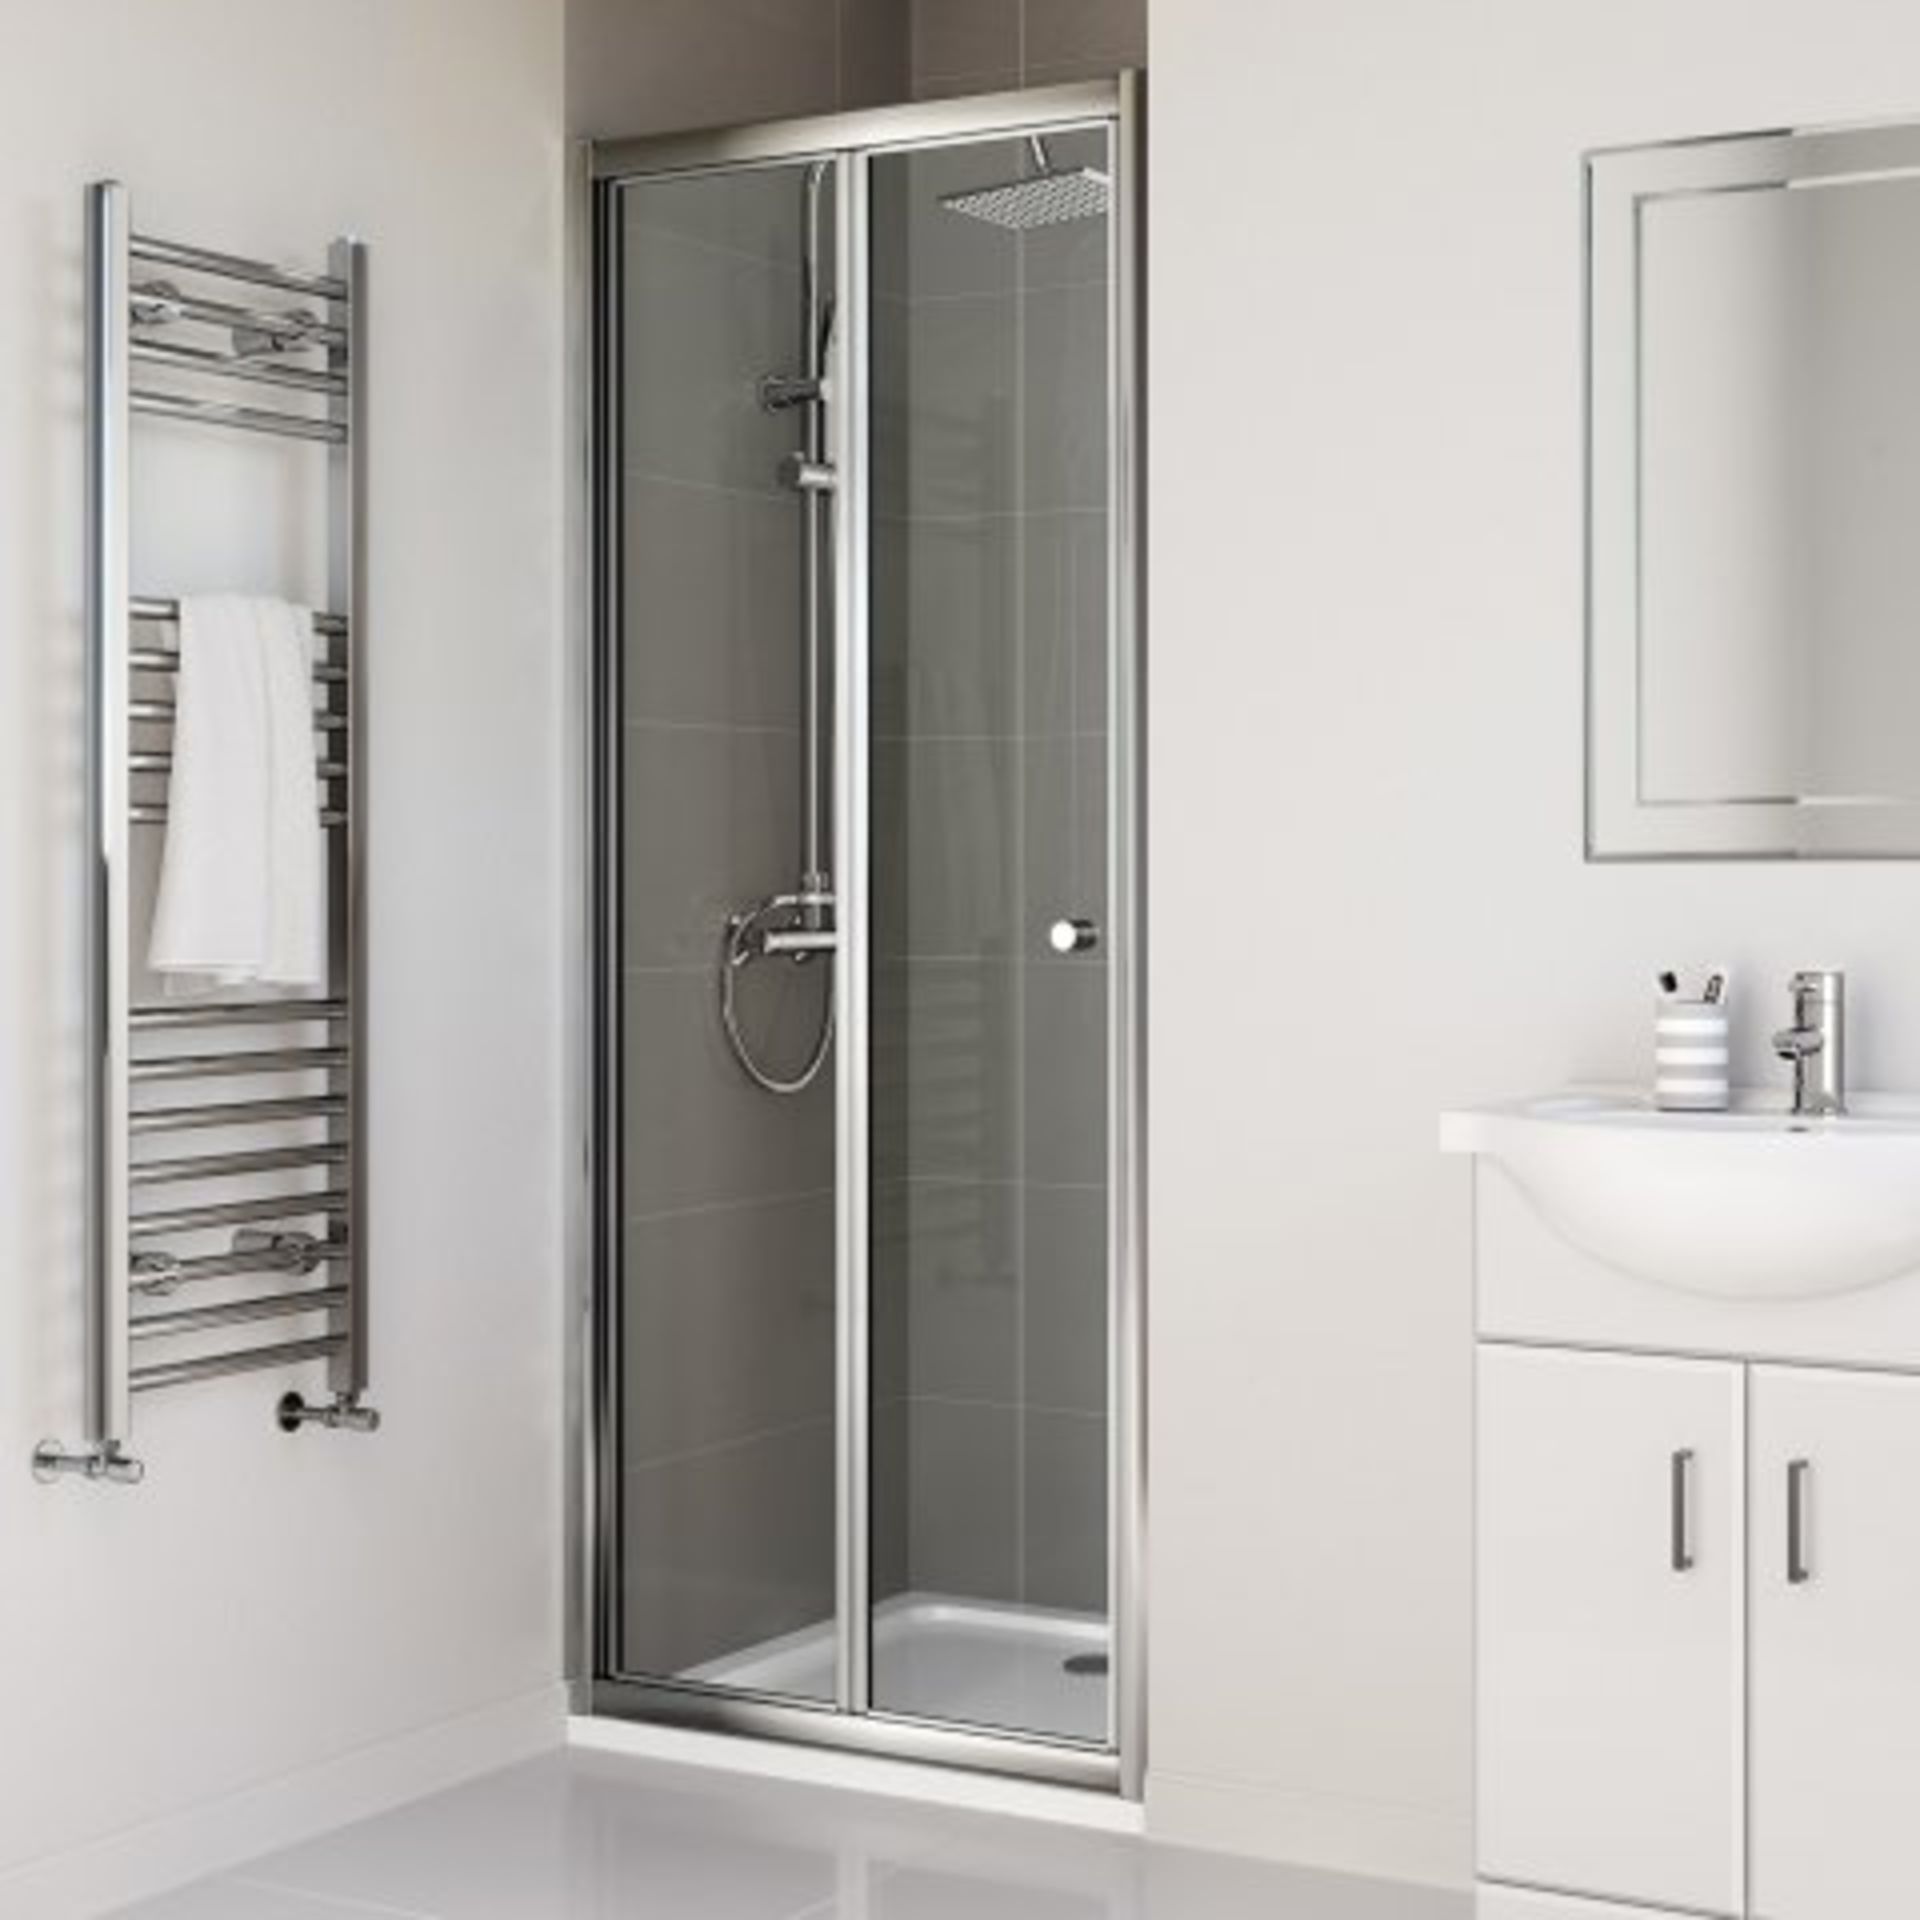 (I19) 760mm - Elements Bi Fold Shower Door RRP £299.99 Do you have an awkward nook or a tricky